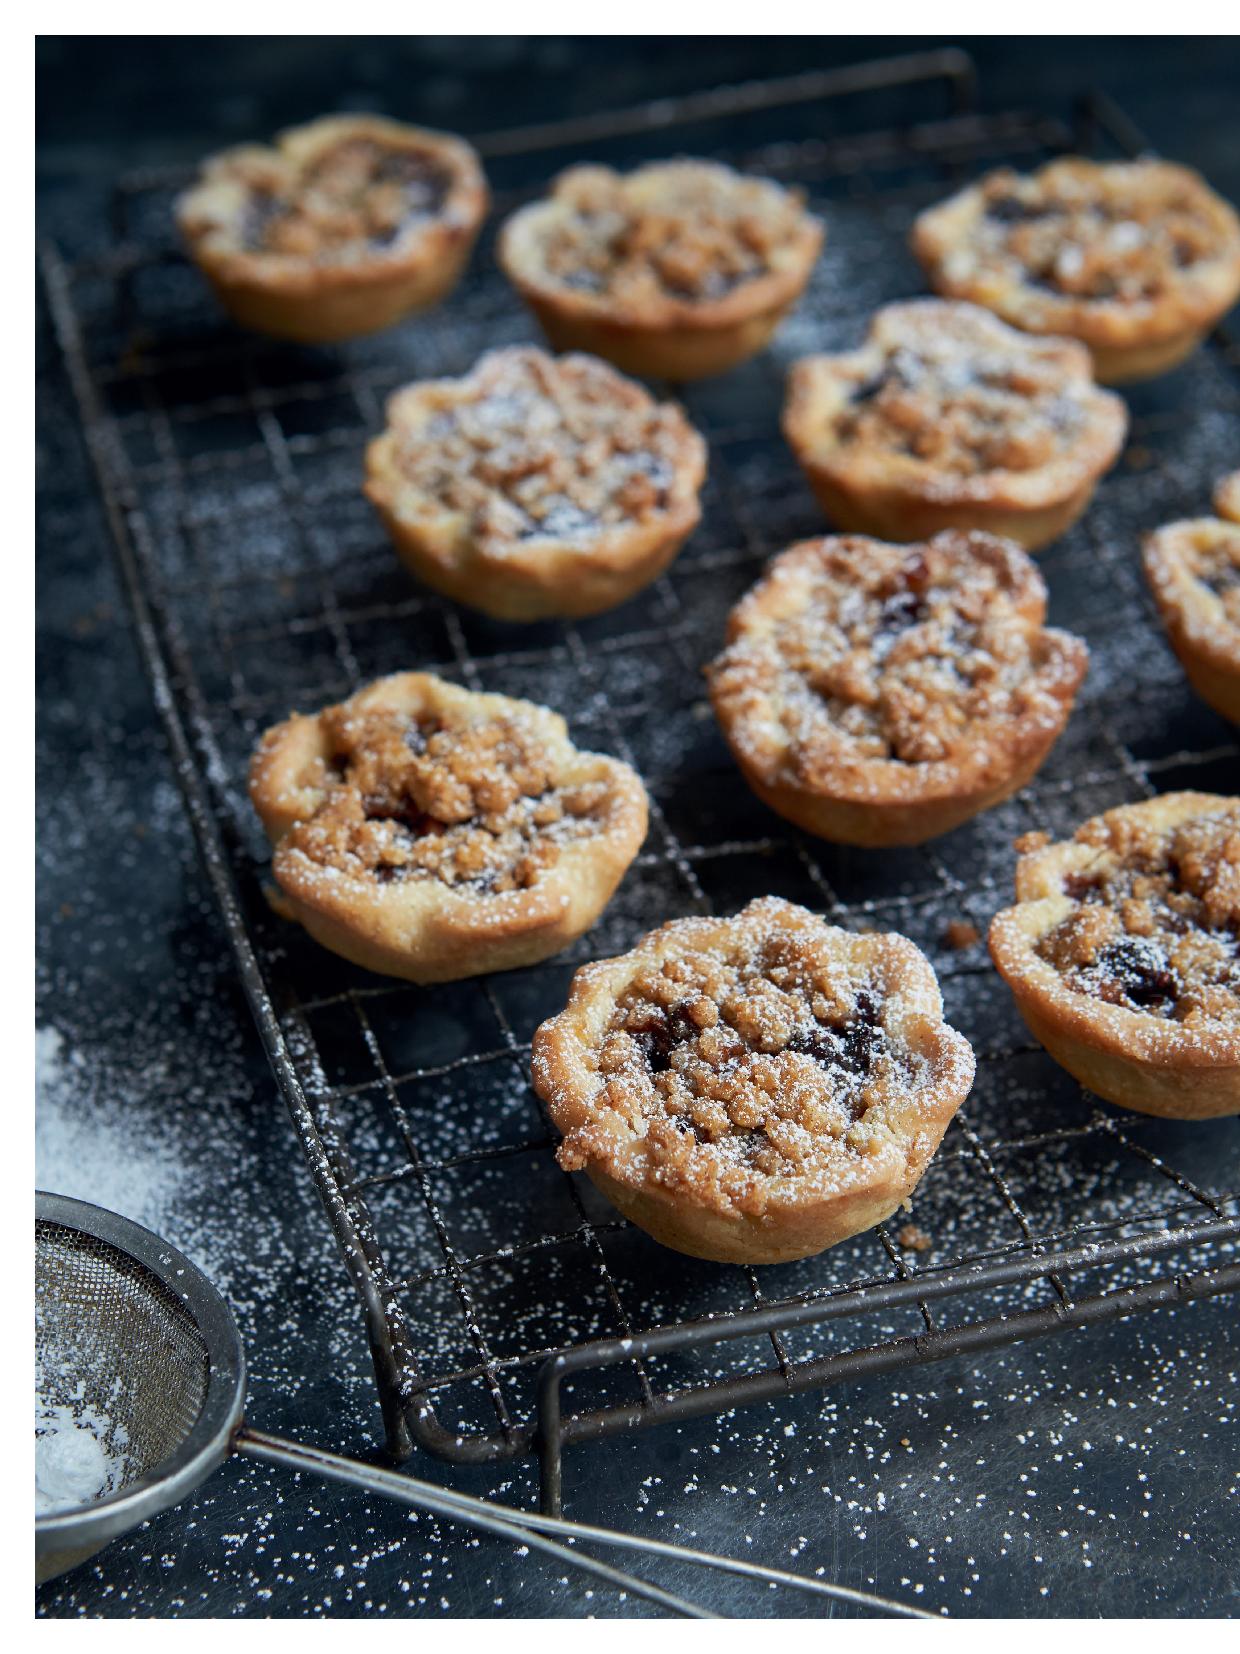 Mince Pies with Spiced Orange Crumble Topping